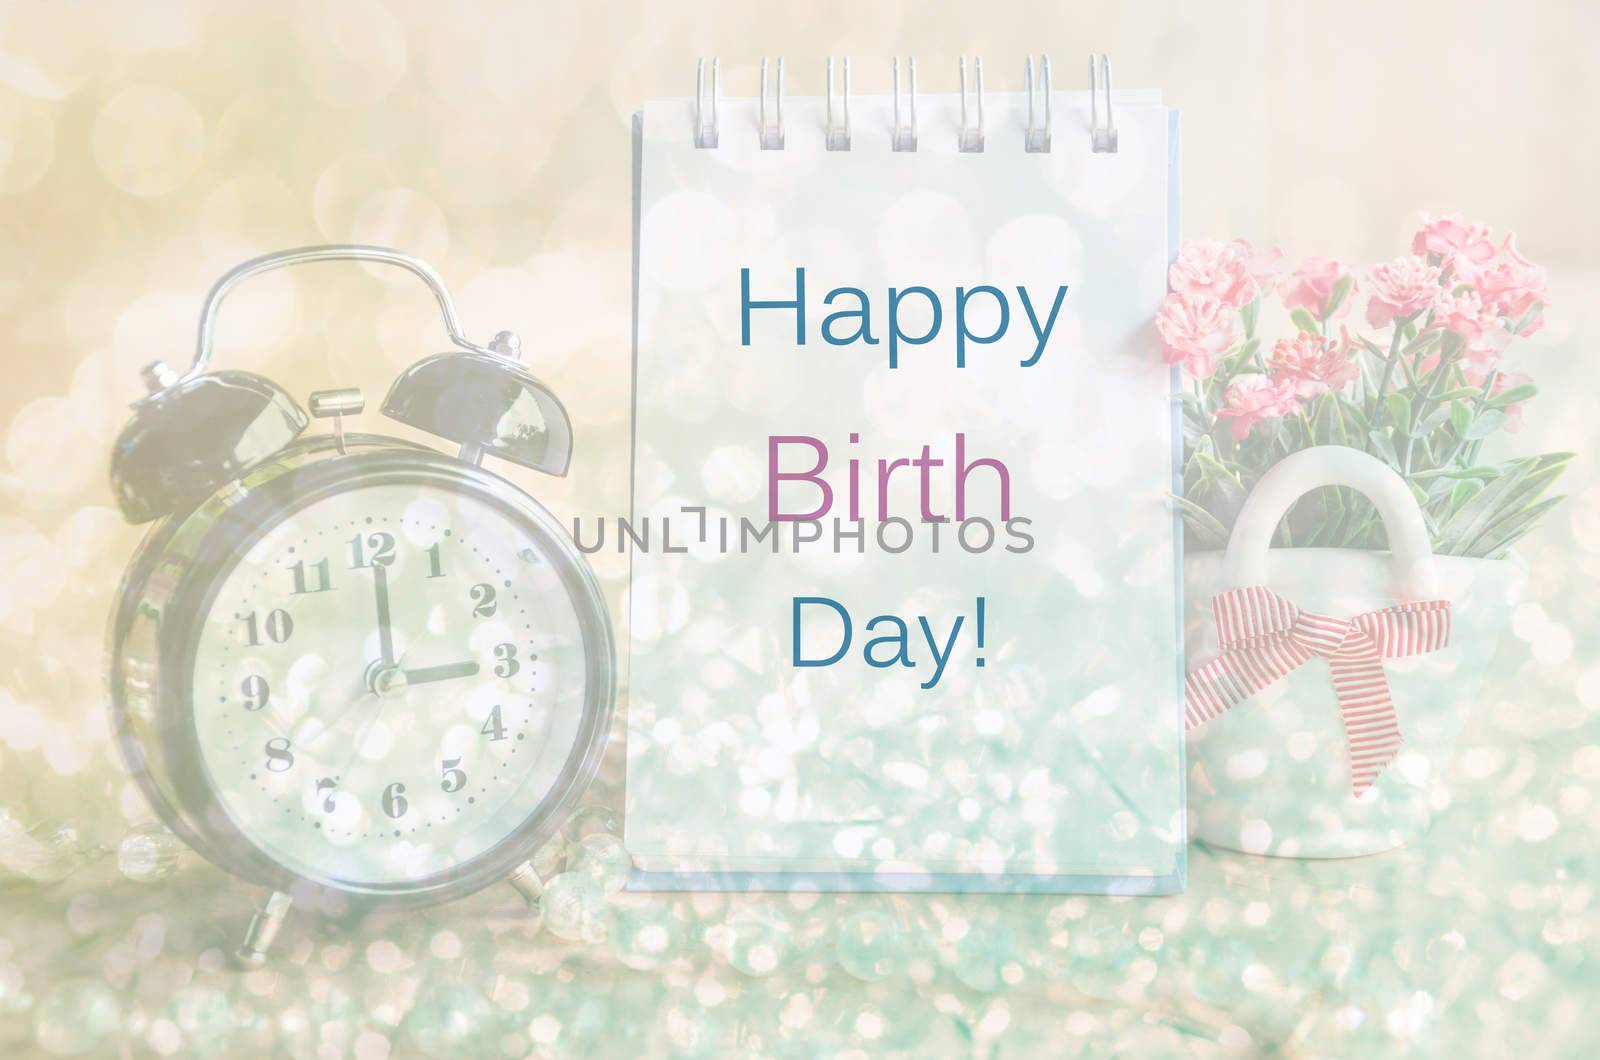 Happy birth day diary and alarm clock with flowers. Soft light background.